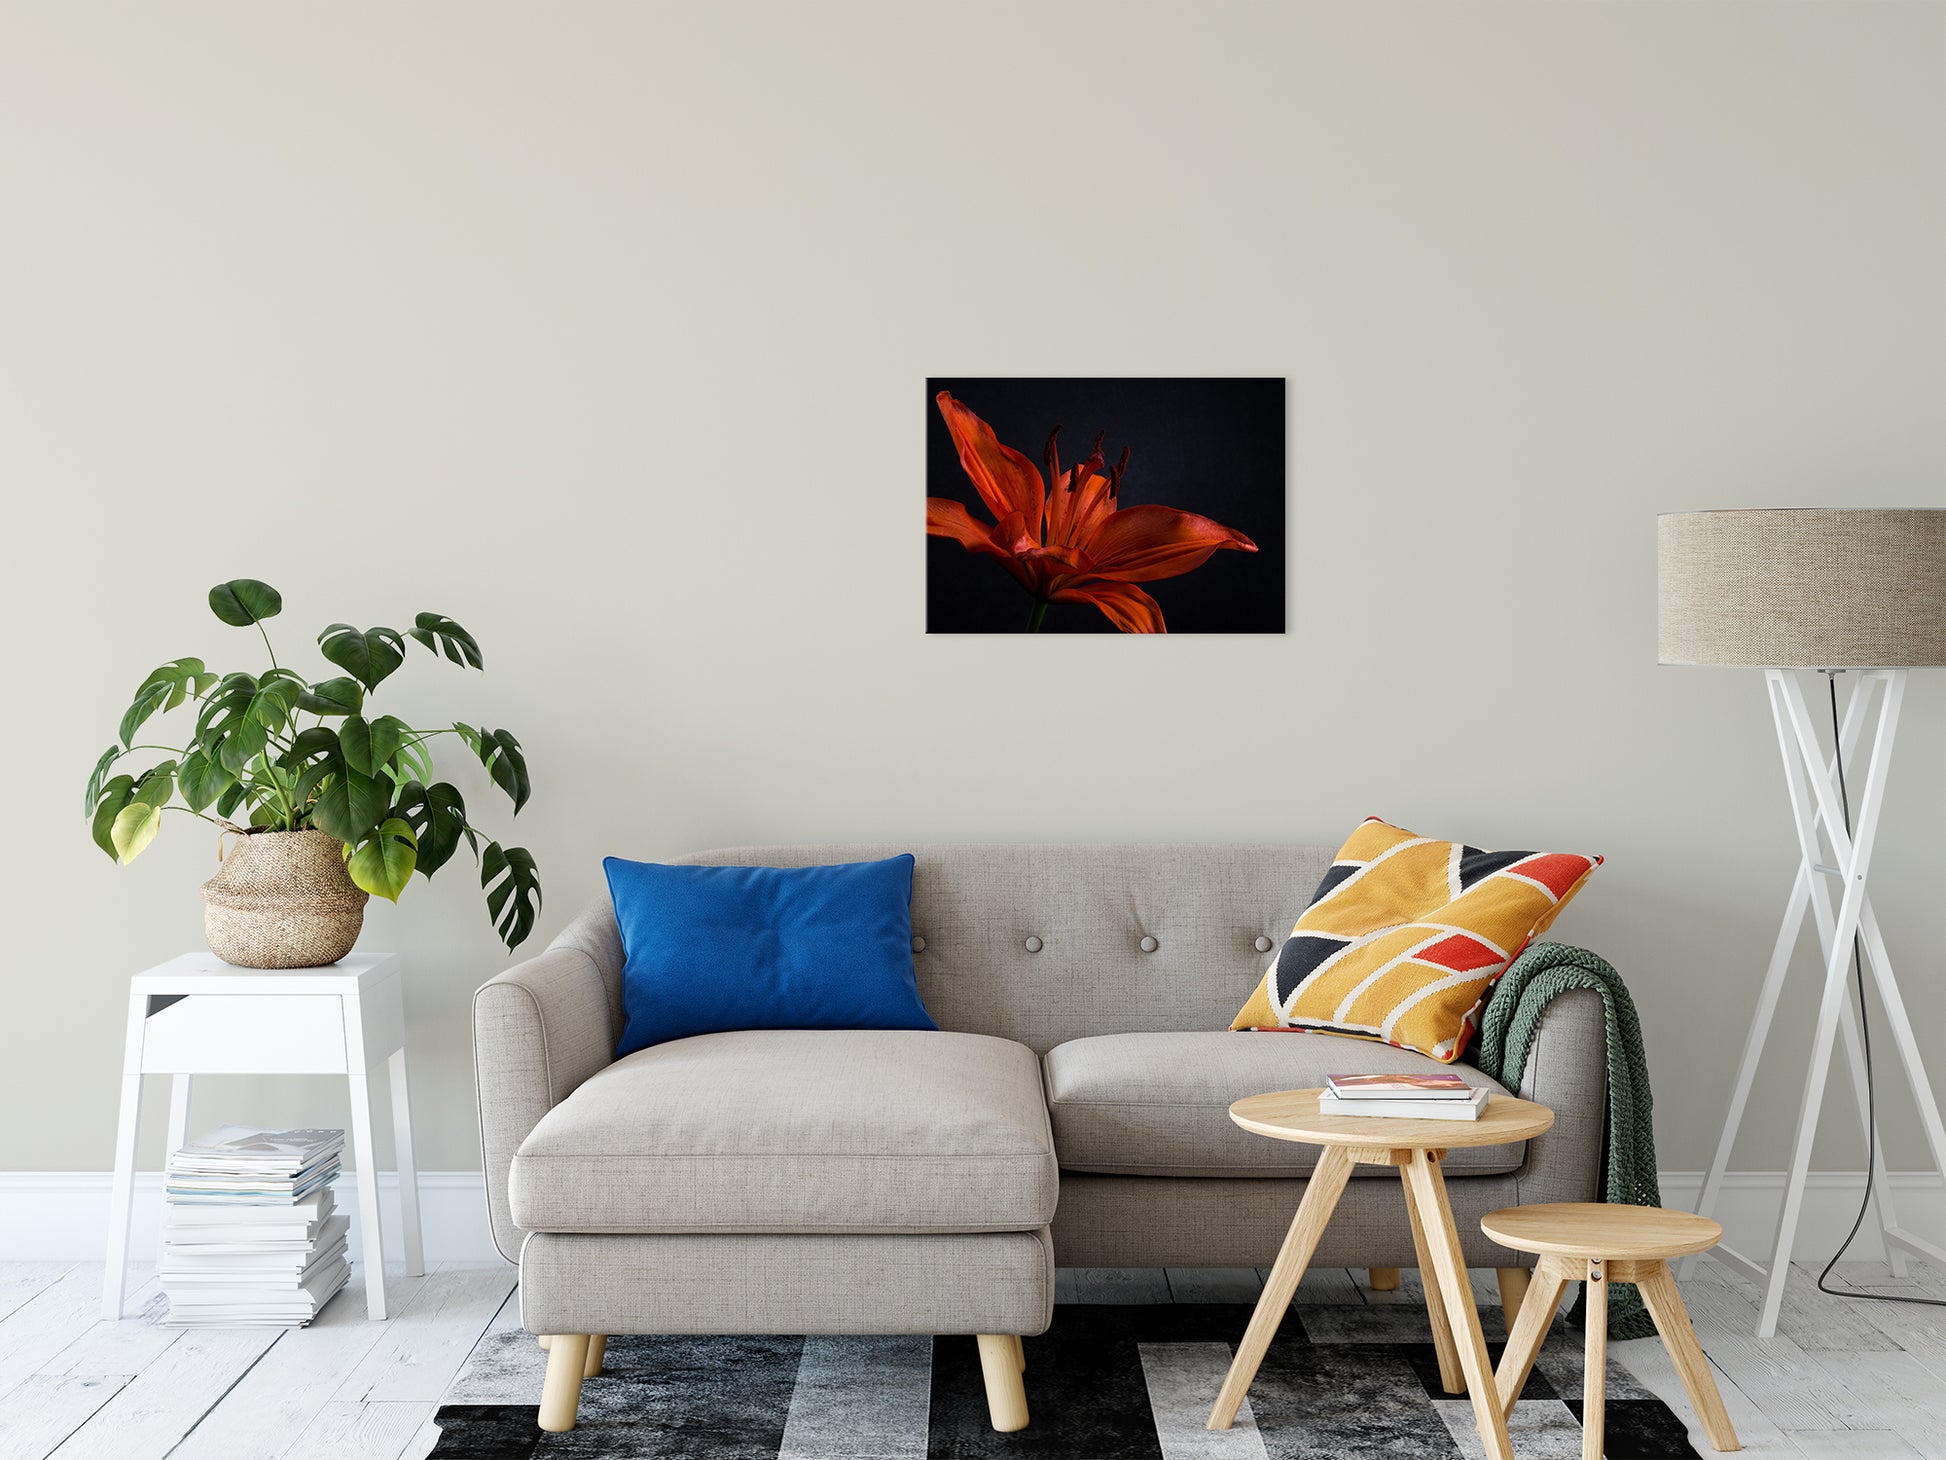 Orange Lily with Backlight Nature / Floral Photo Fine Art Canvas Wall Art Prints 20" x 24" - PIPAFINEART